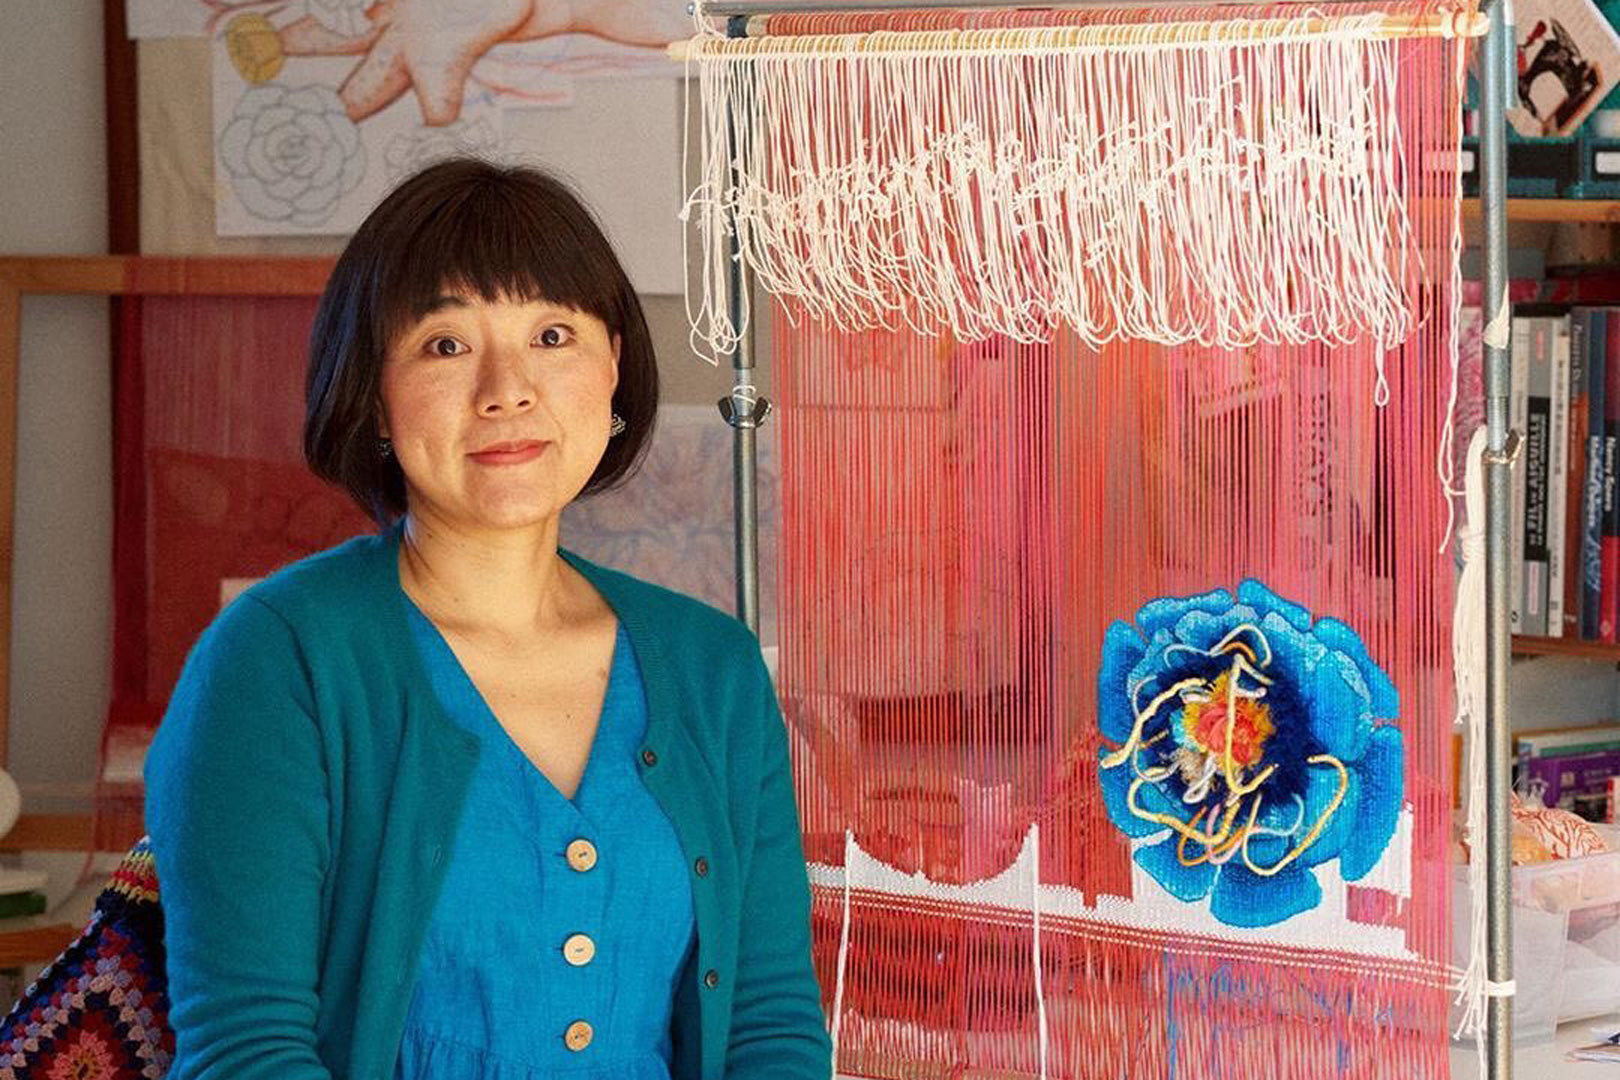 A female artist: Ema Shine,  in a turquoise cardigan smiling softly, sitting beside her colorful textile art on a loom in a studio filled with creative materials and art books.